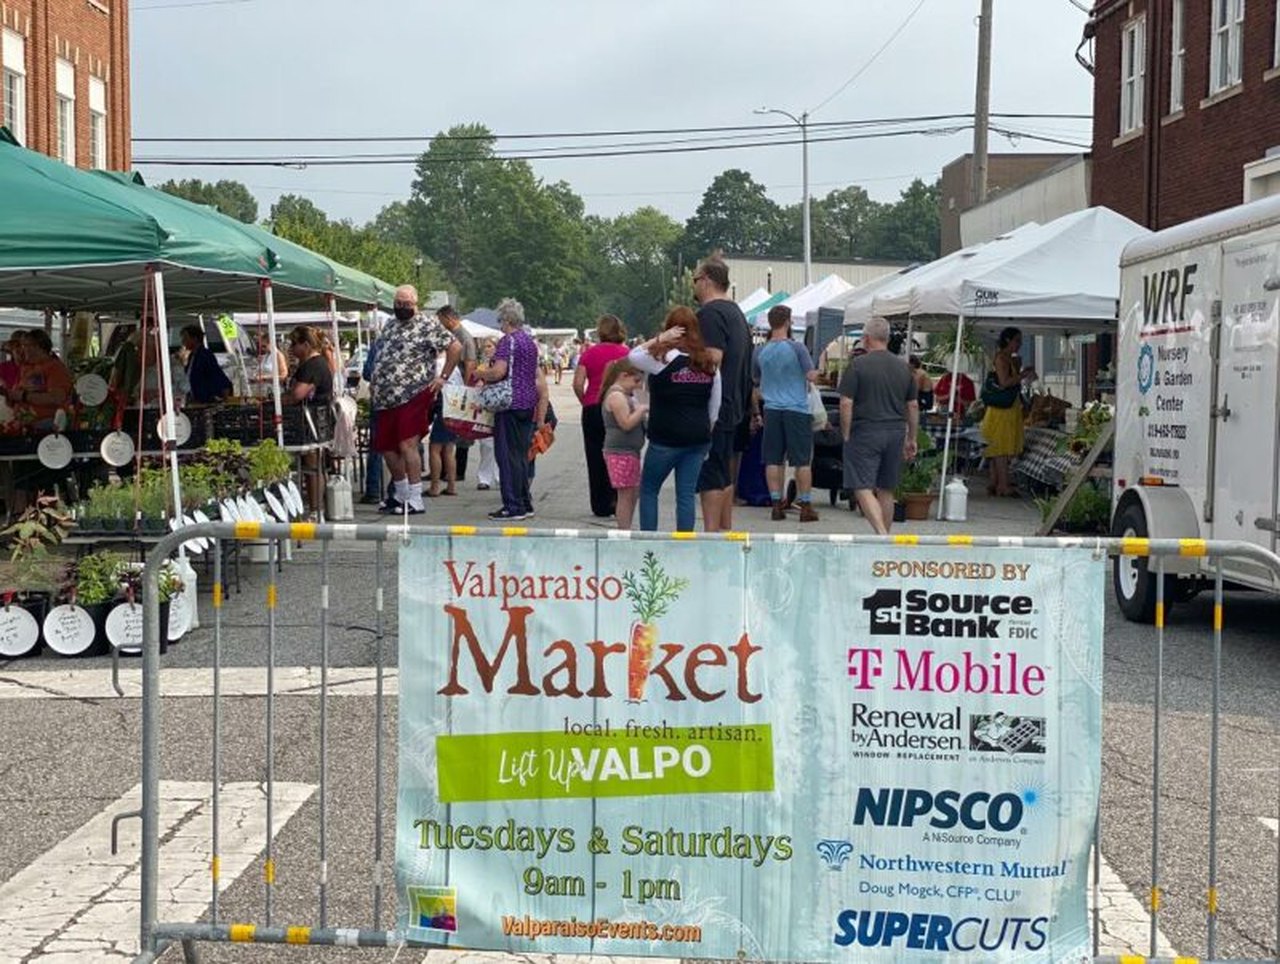 The Valparaiso Outdoor Market In Indiana Is A MustDo Before It's Gone